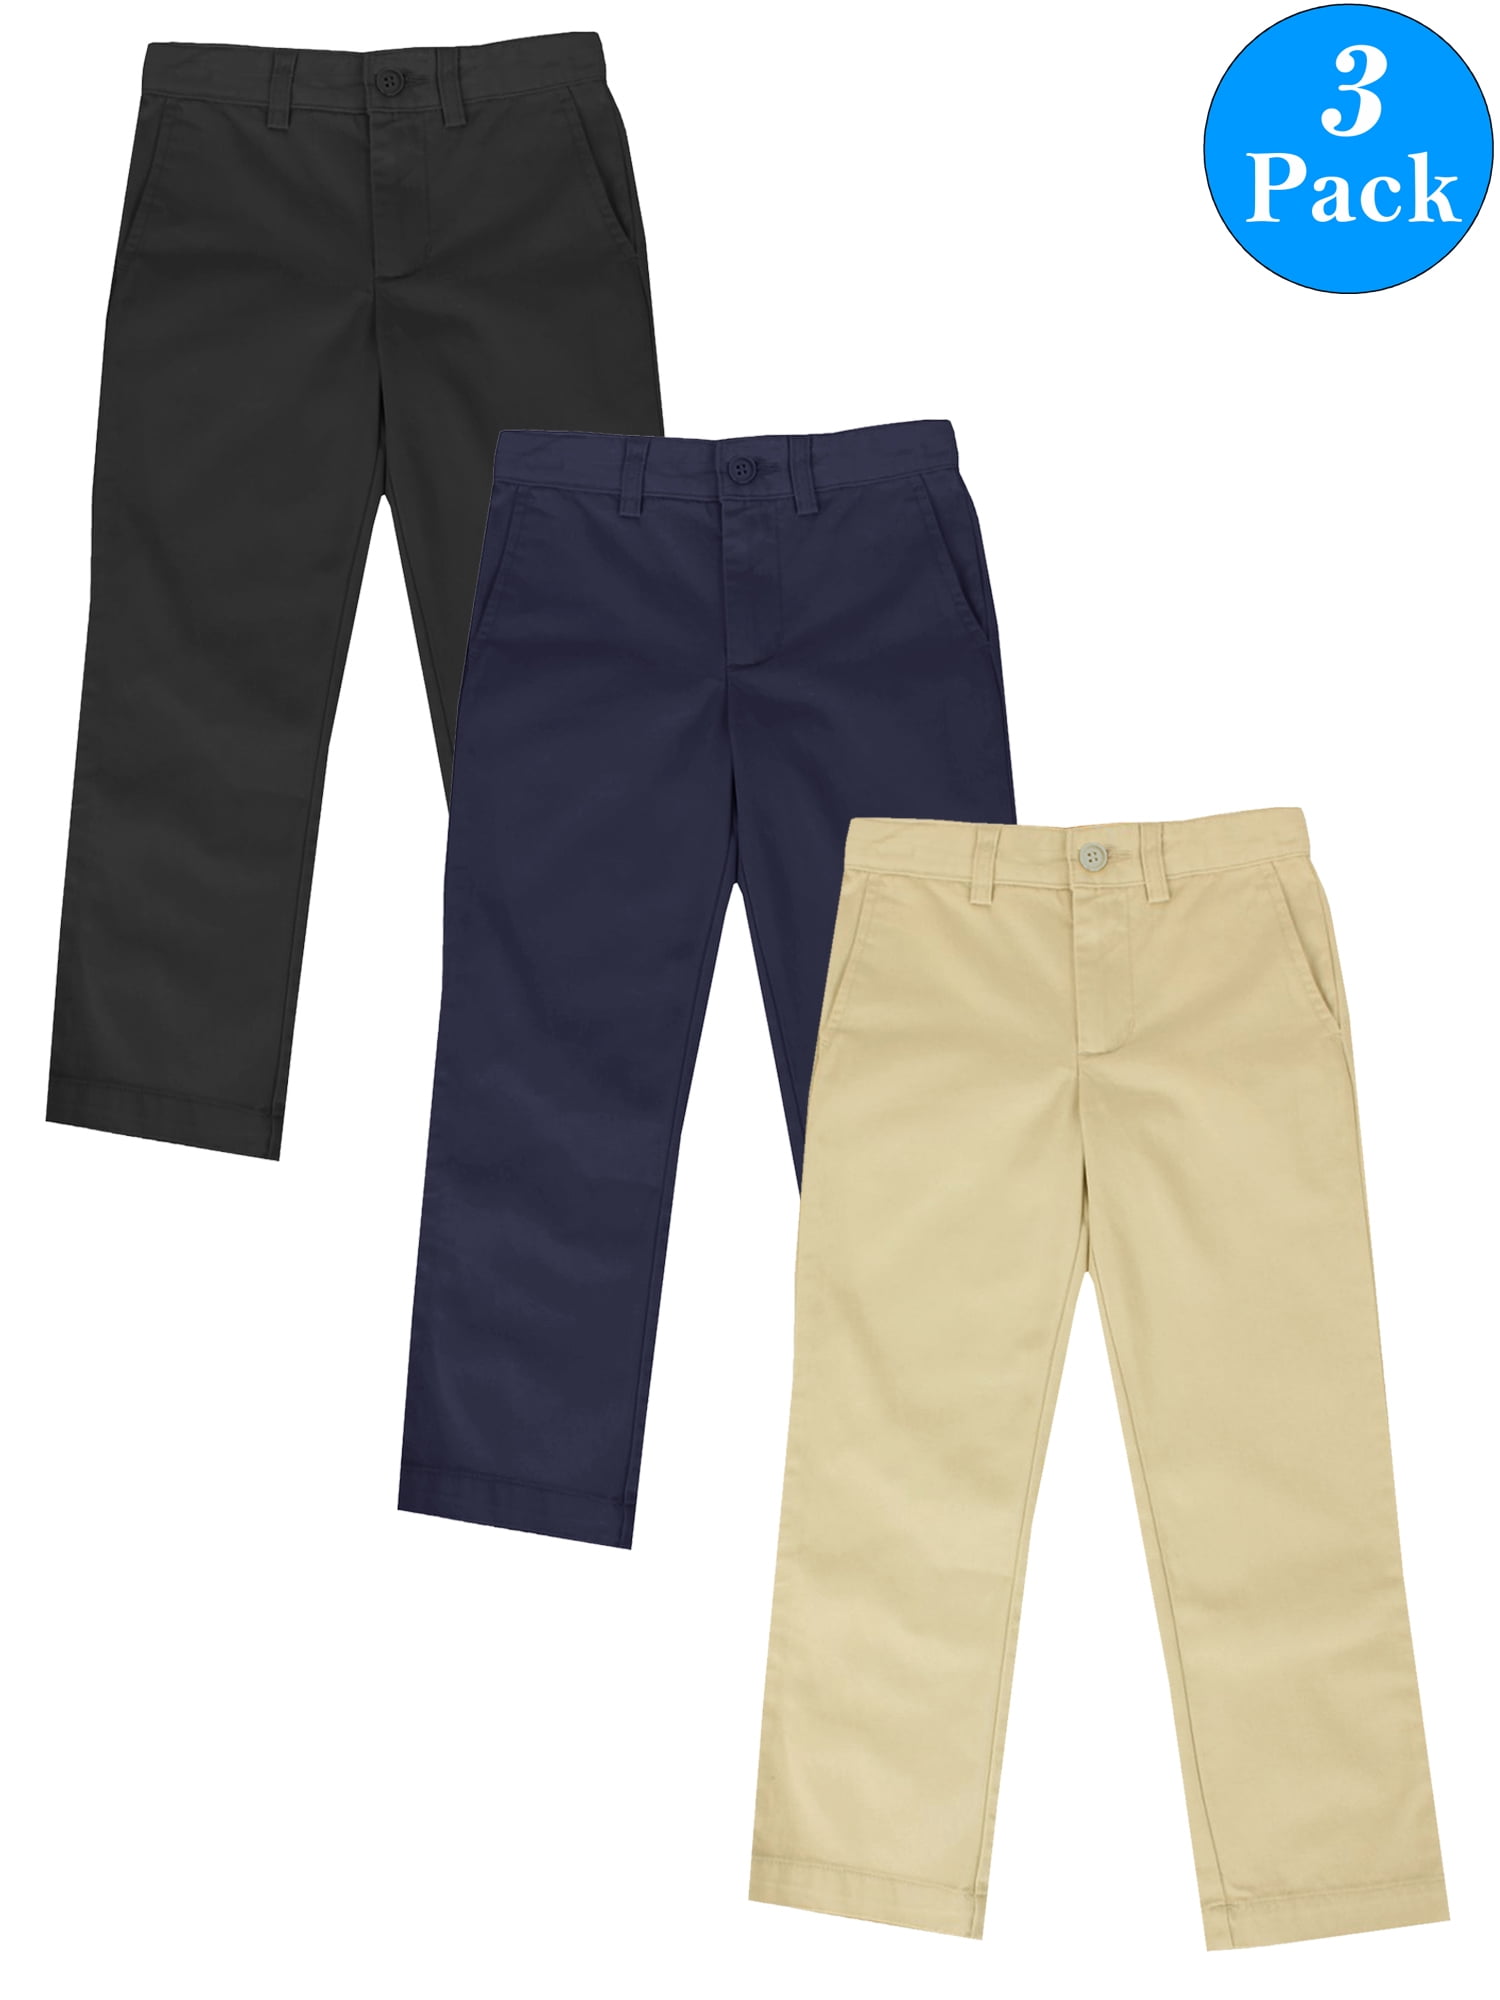 Buy AUW UNIVERSAL Flat Front Pants for Boys  All Uniform Wear